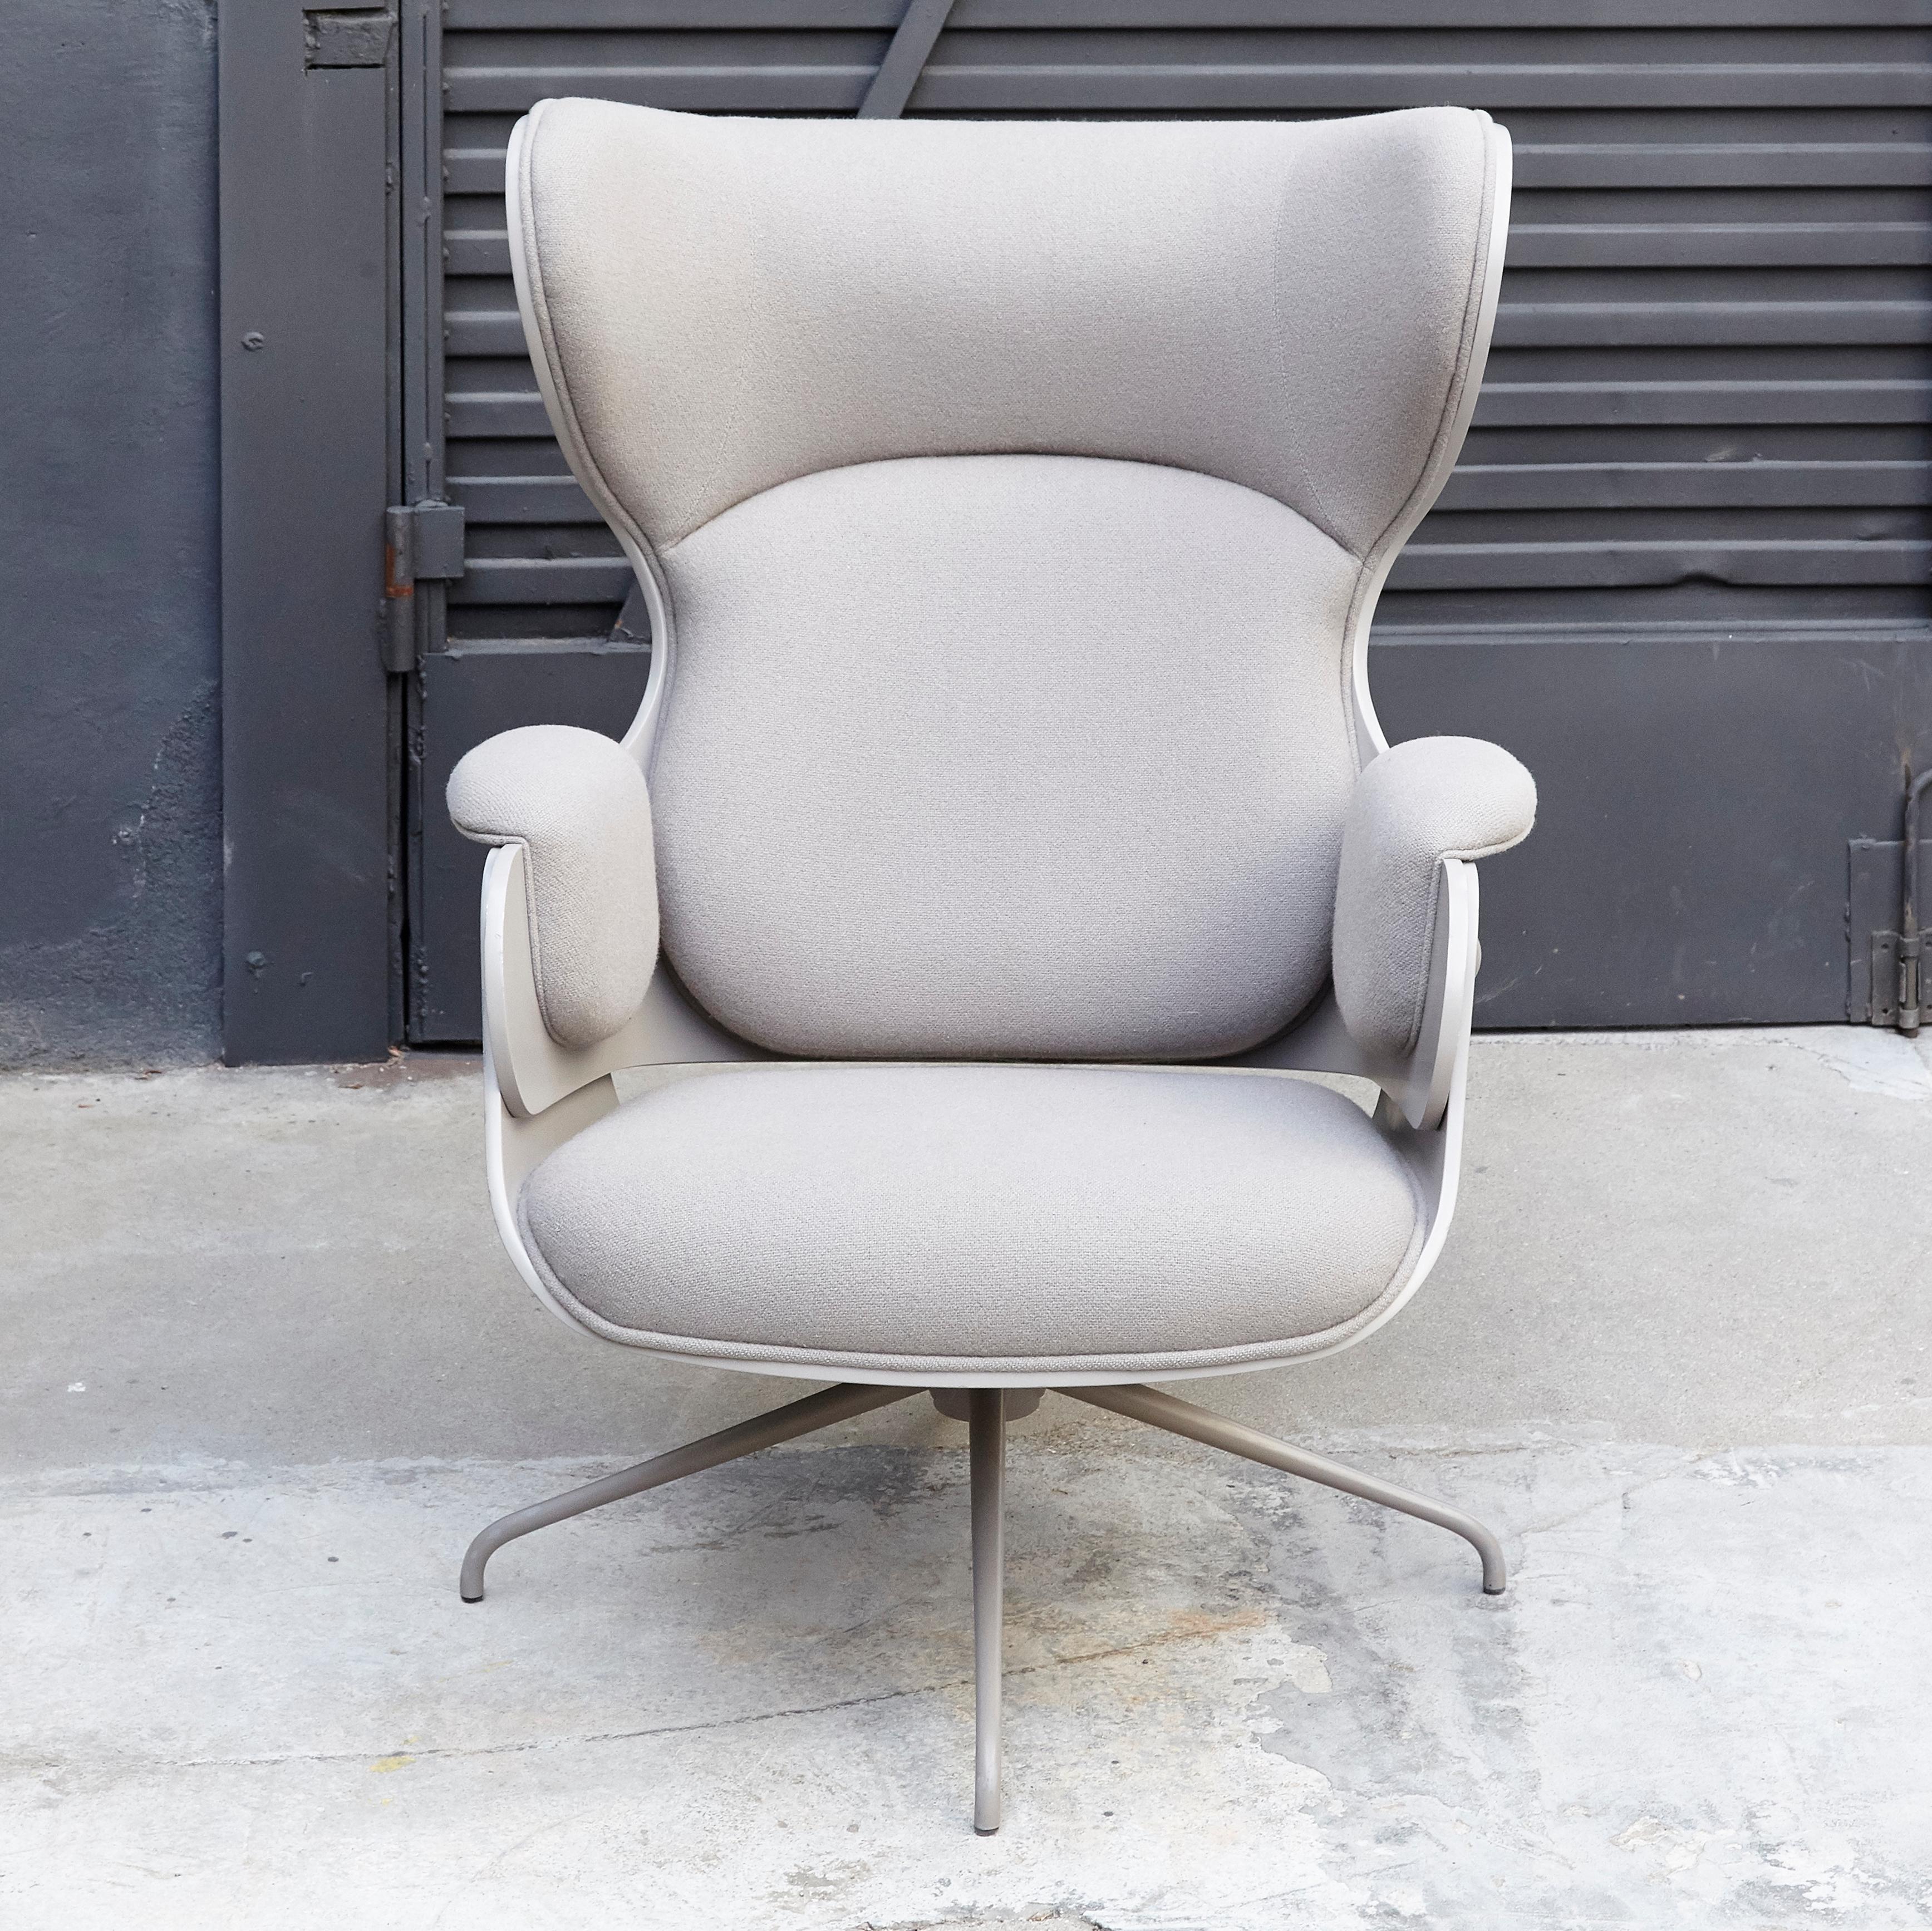 Armchair structure base in cast aluminium.

Seat, backrest are in plywood with exteriors in grey.
Grey upholstery.

